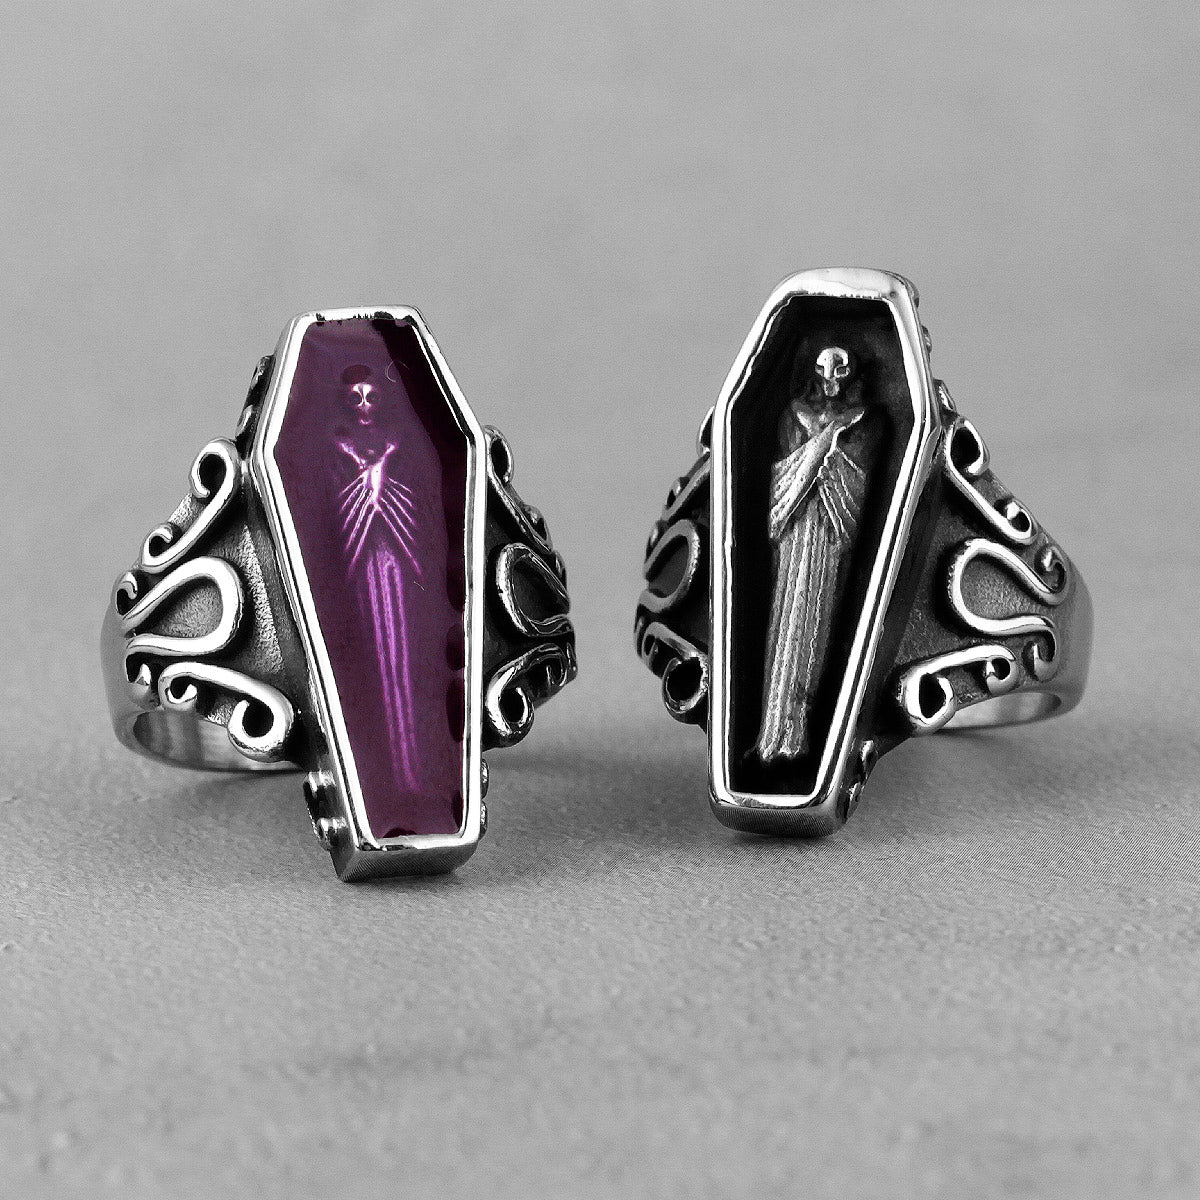 The Enigmatic Vampire Crypt Gothic Punk Statement Ring